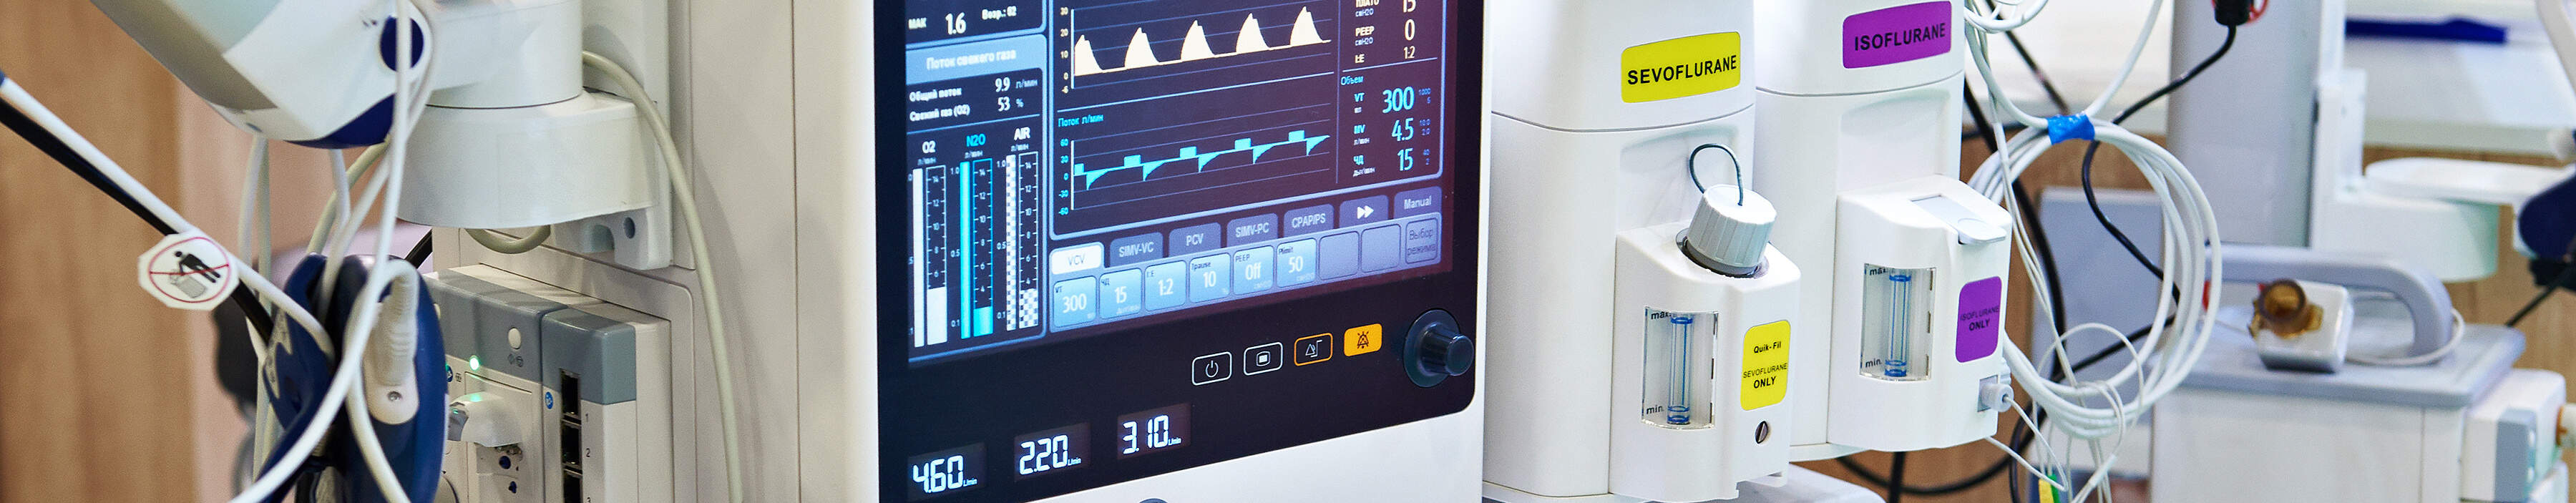  Modern anesthesiology equipment, showcasing the precision and control required for safe patient sedation.